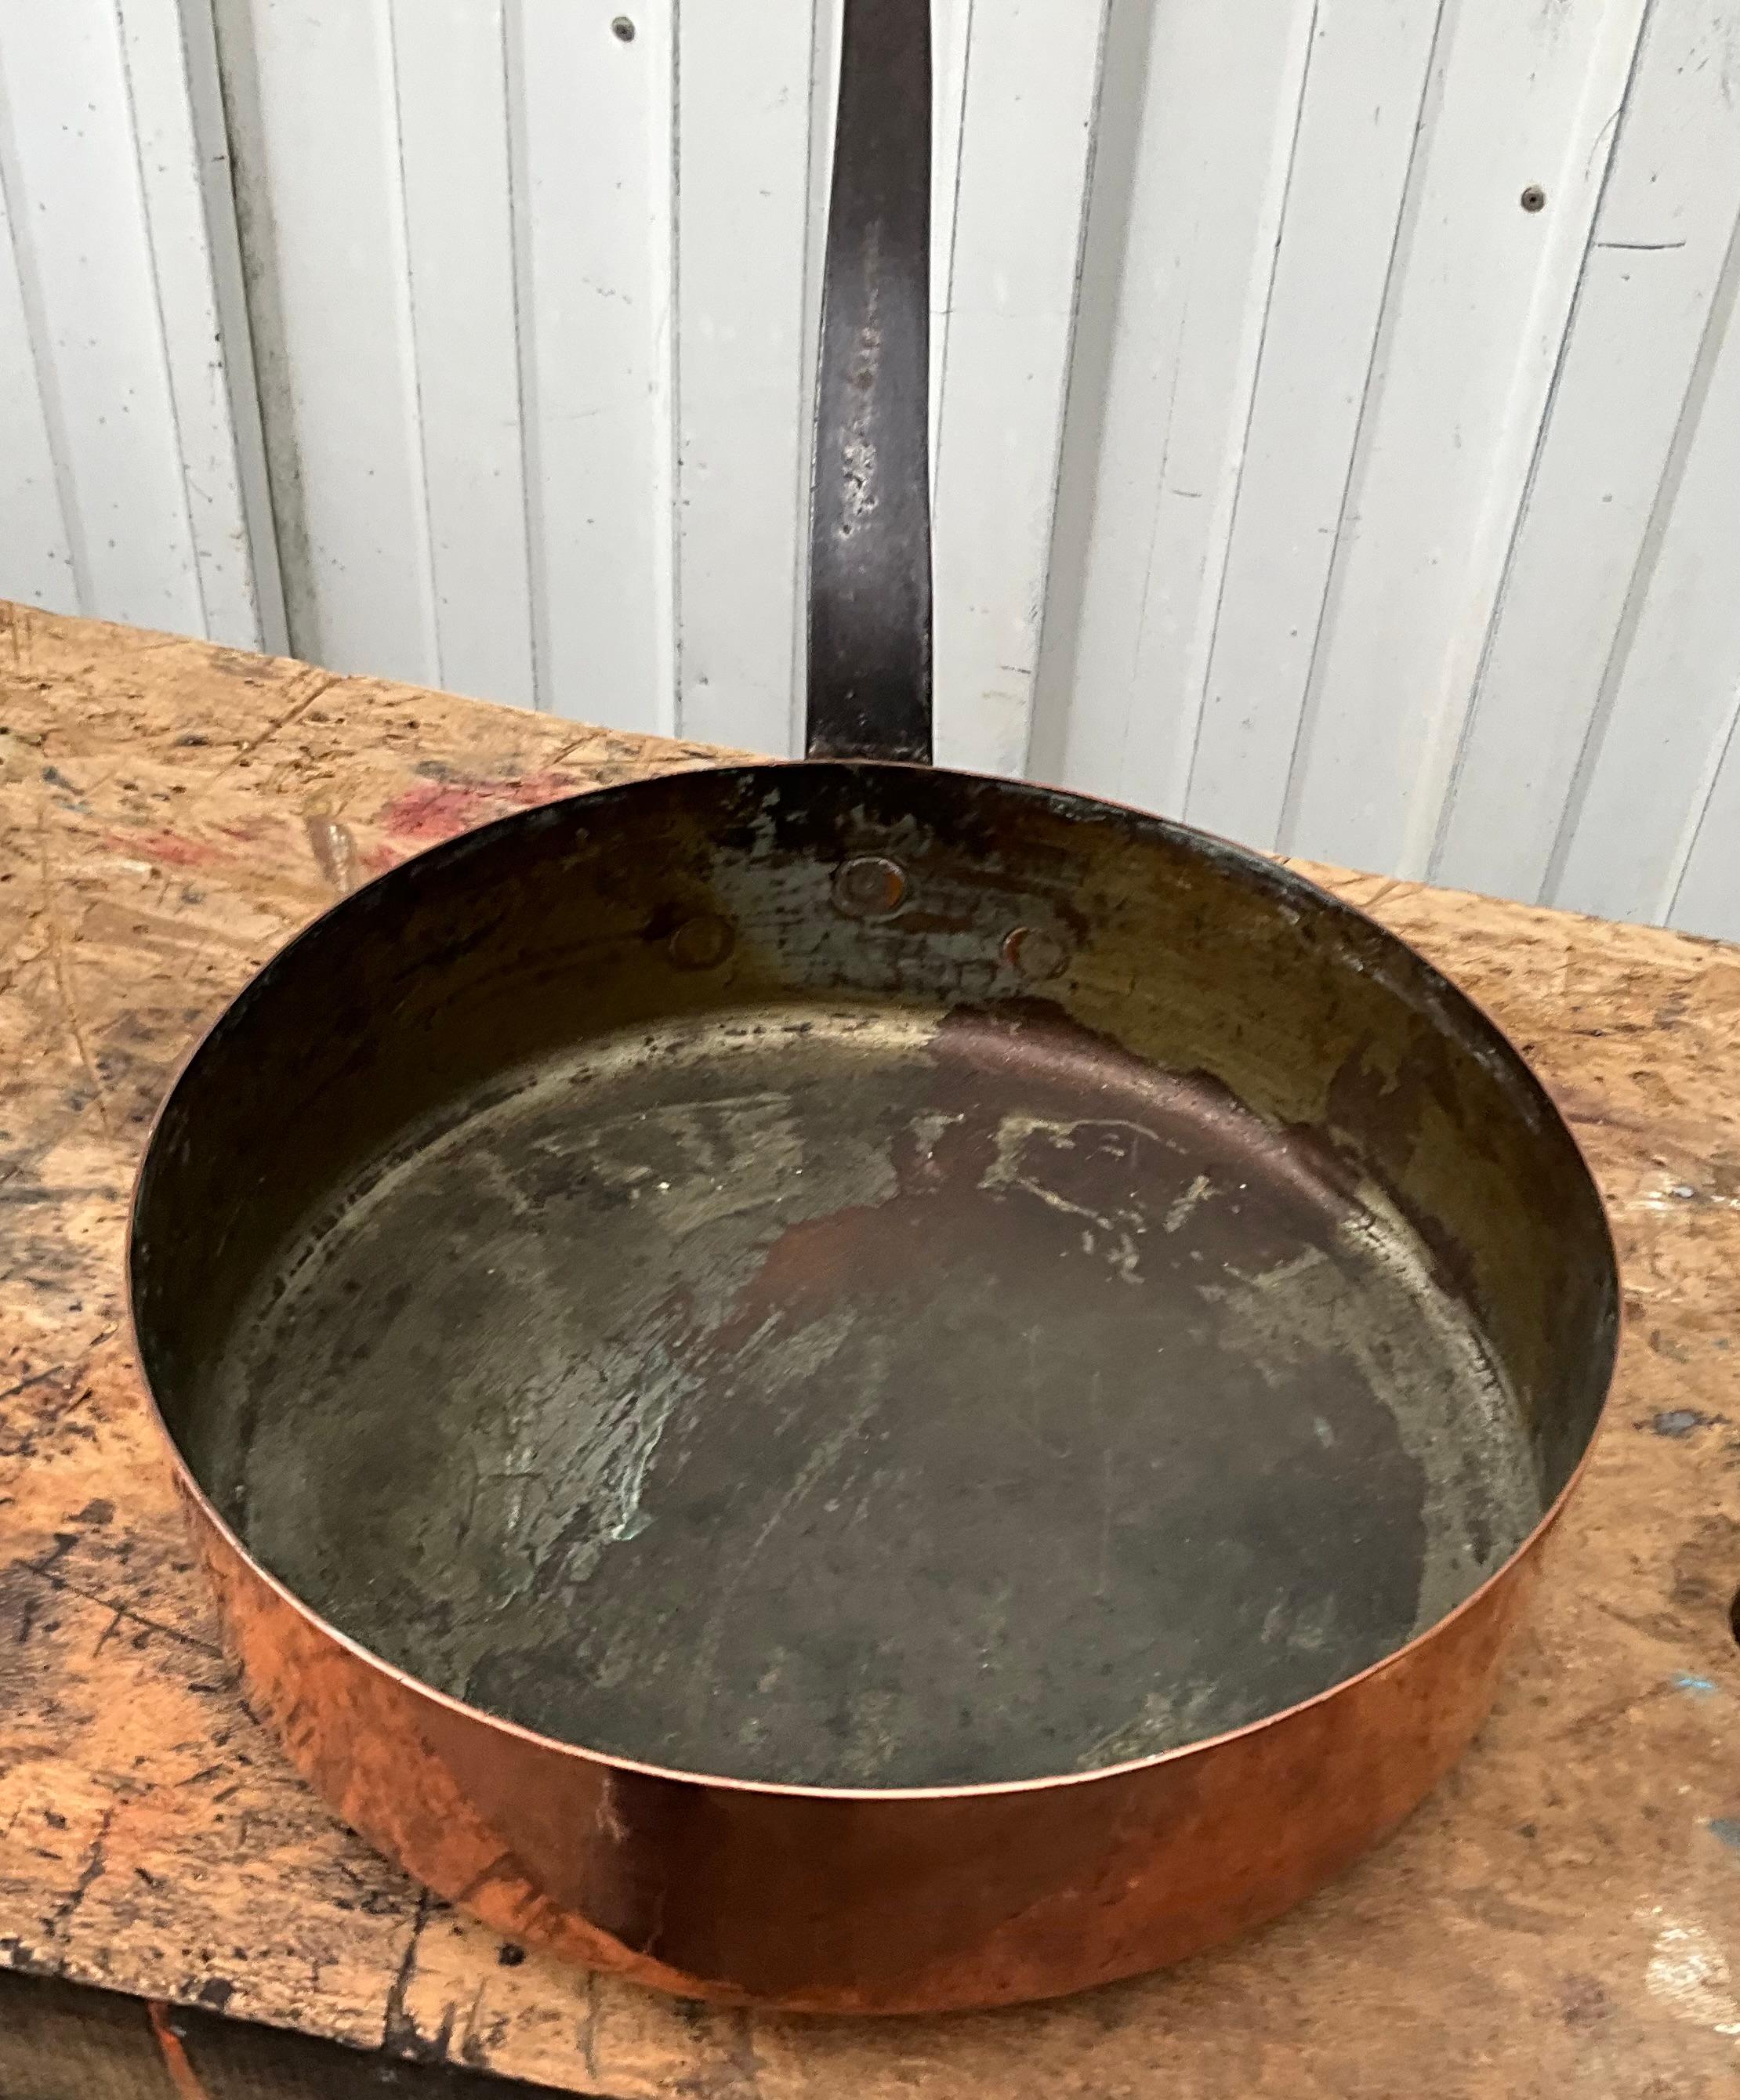 This French copper sauté pan is from the 19th century. it was hand-forged in Villedieu-les-Poêles in Normandy.

It is of high quality, heavy and have a nice long riveted iron handle. Its patina is beautiful.

A beautiful copper sauté pan makes many